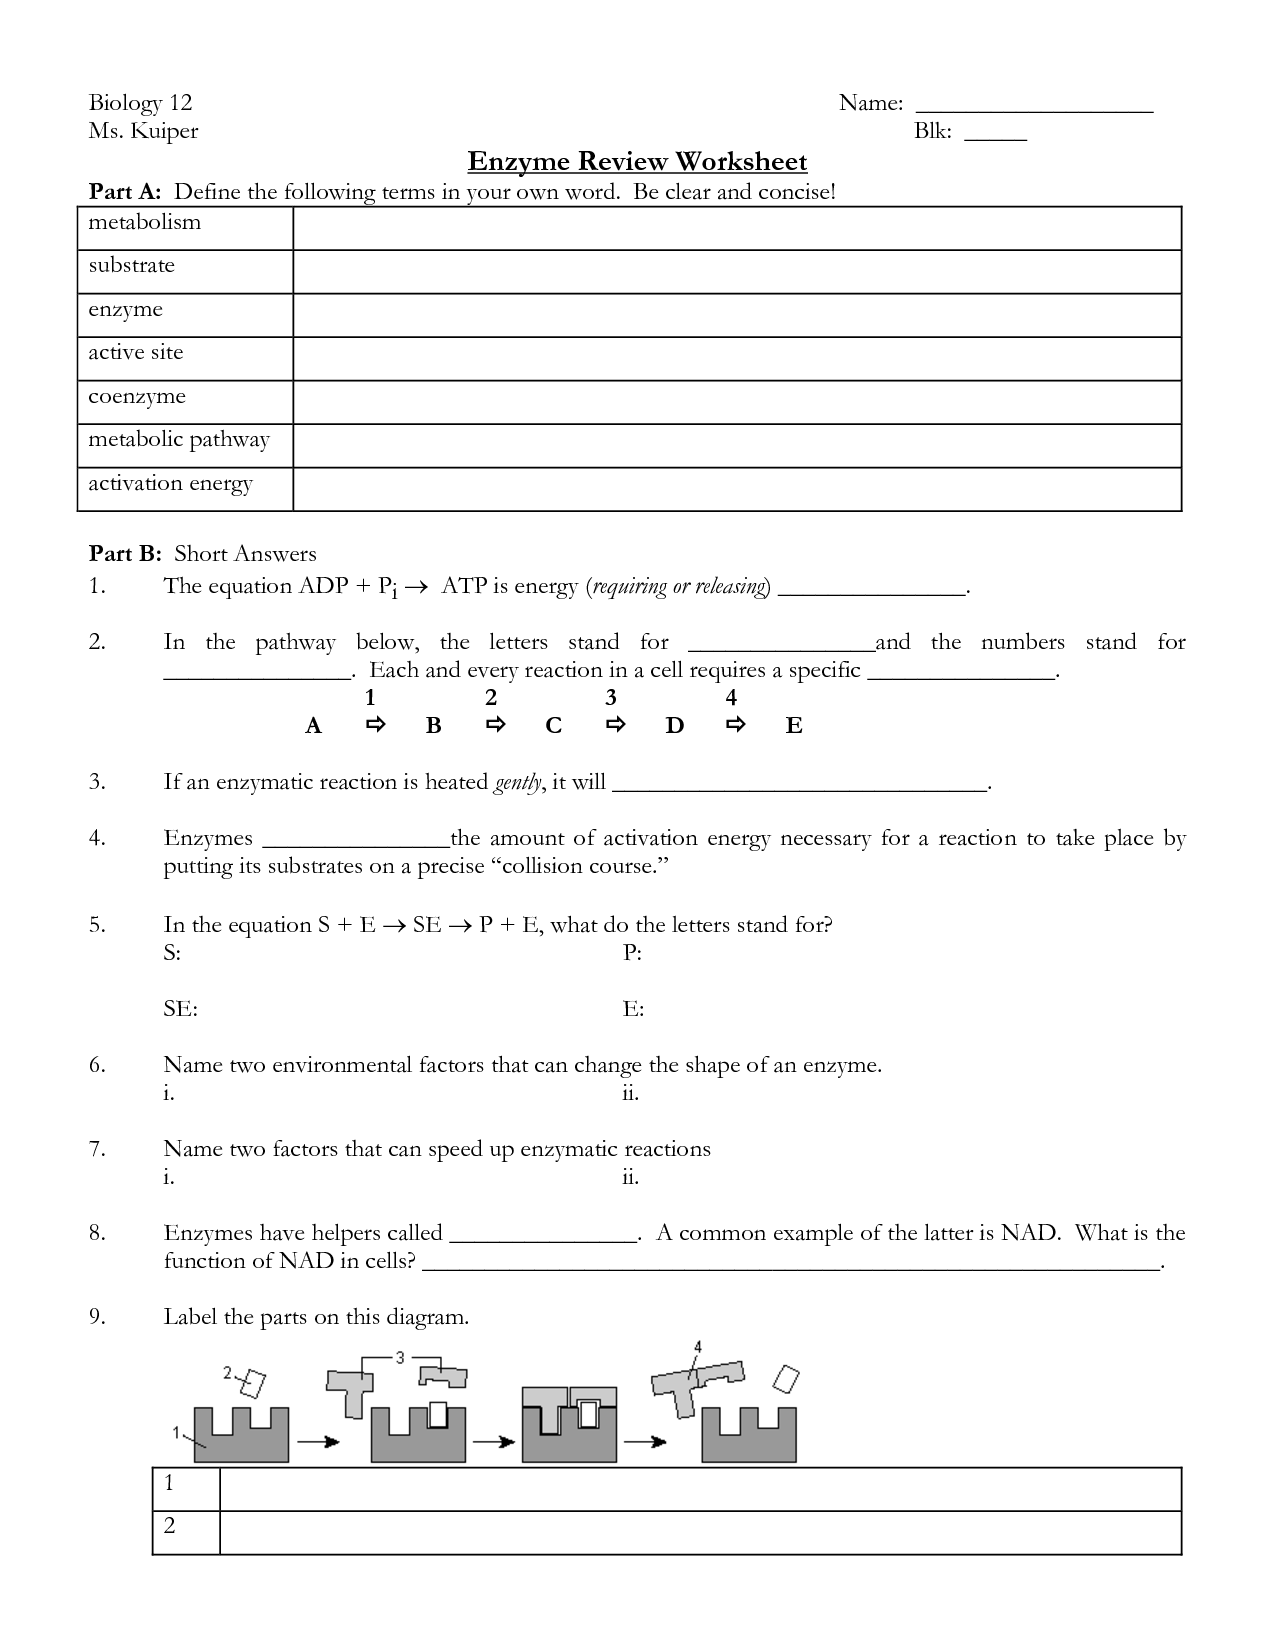 The 12 Cell Review Worksheet Answers Biology Image